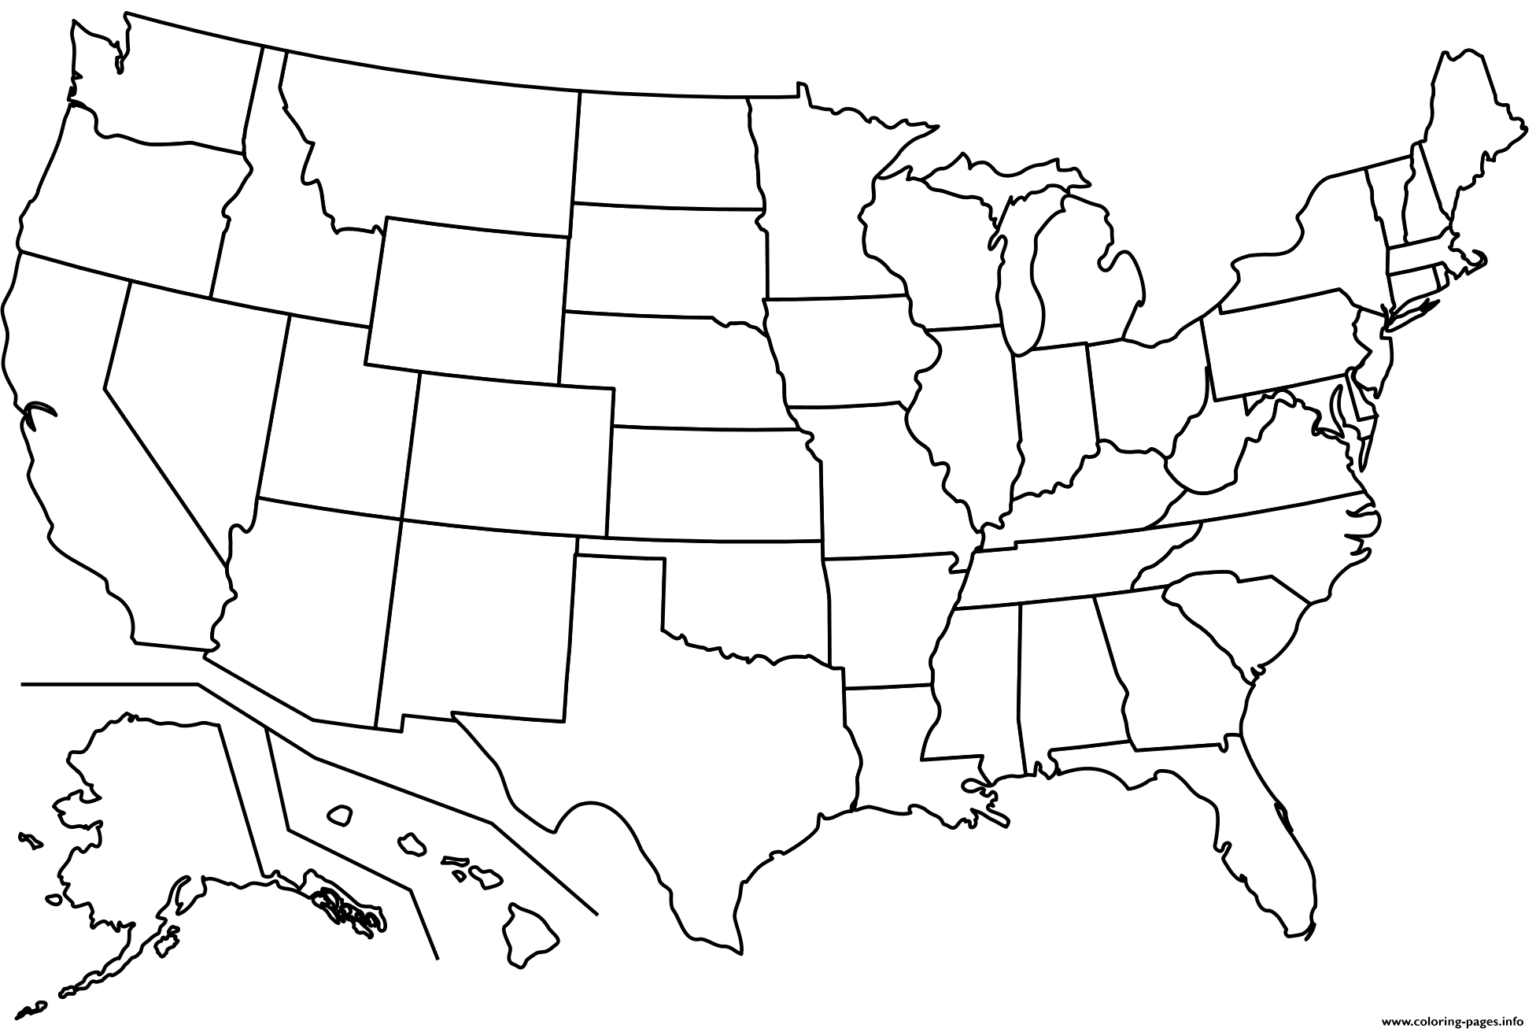 outline-map-of-us-states-coloring-pages-printable-printable-map-of-usa